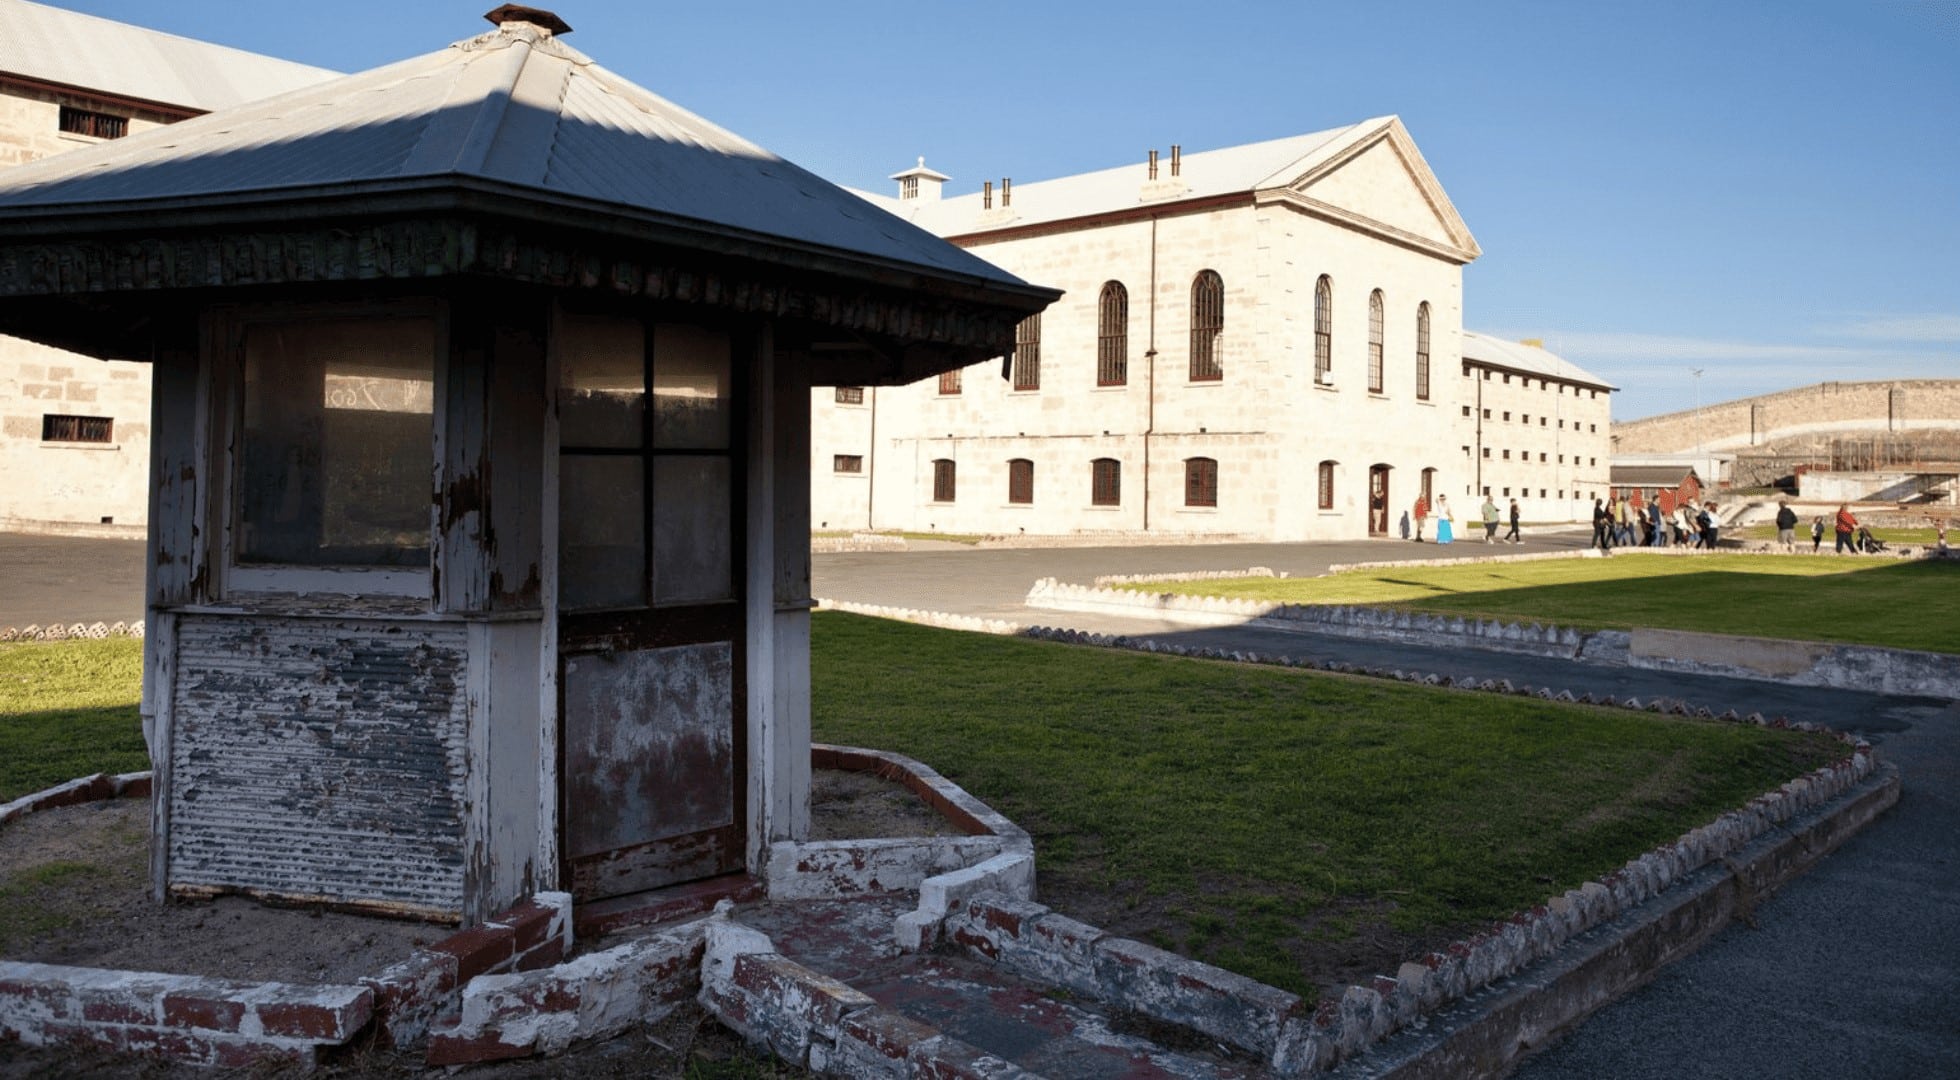 fremantle prison - things to do in western australia